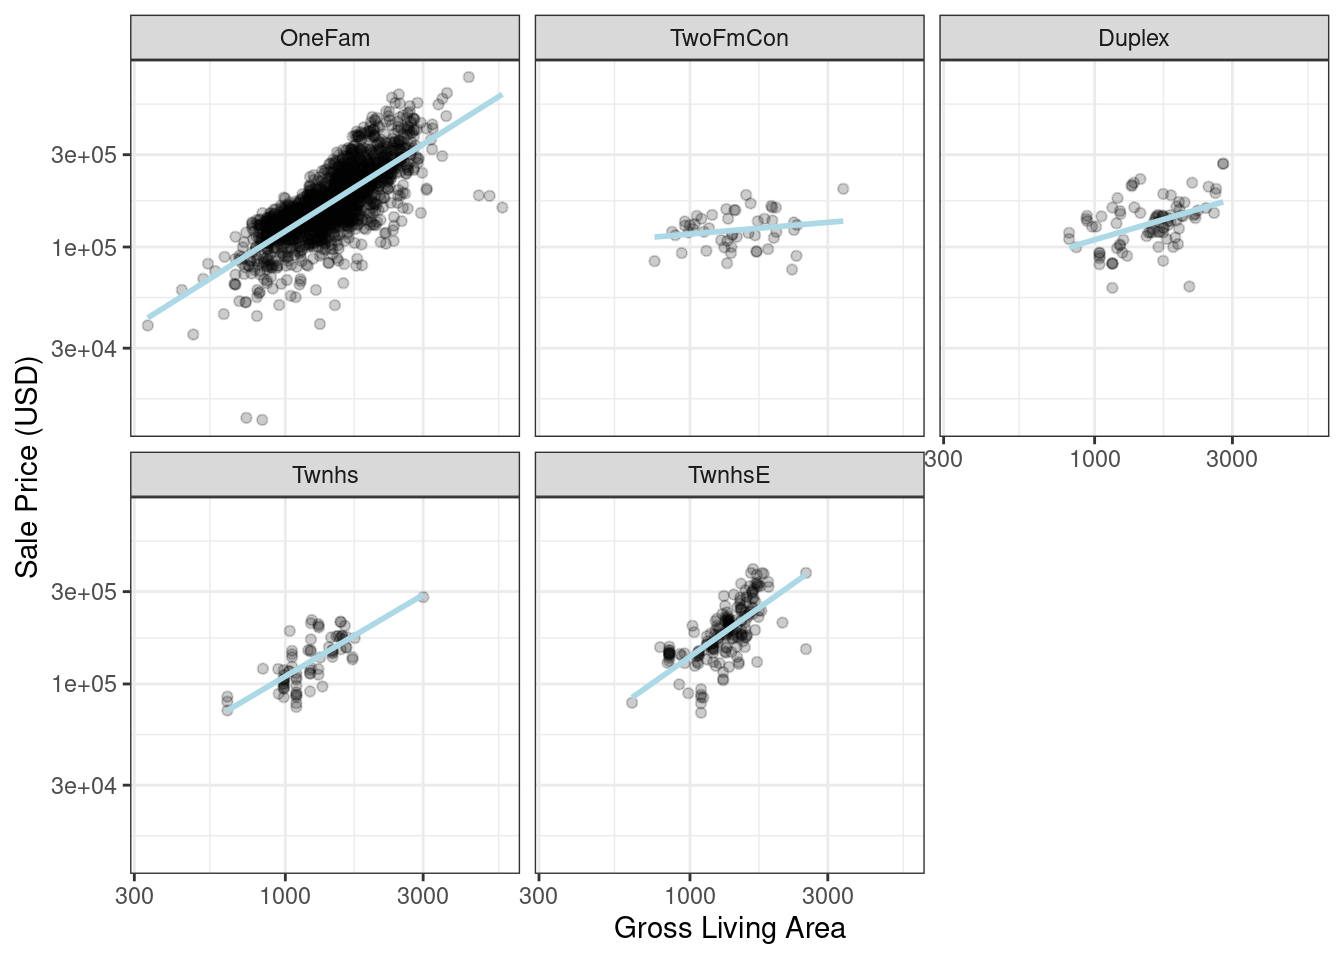 Scatter plots of gross living area (in log-10 units) versus sale price (also in log-10 units) for five different building types. All trends are linear but appear to have different slopes and intercepts for the different building types.